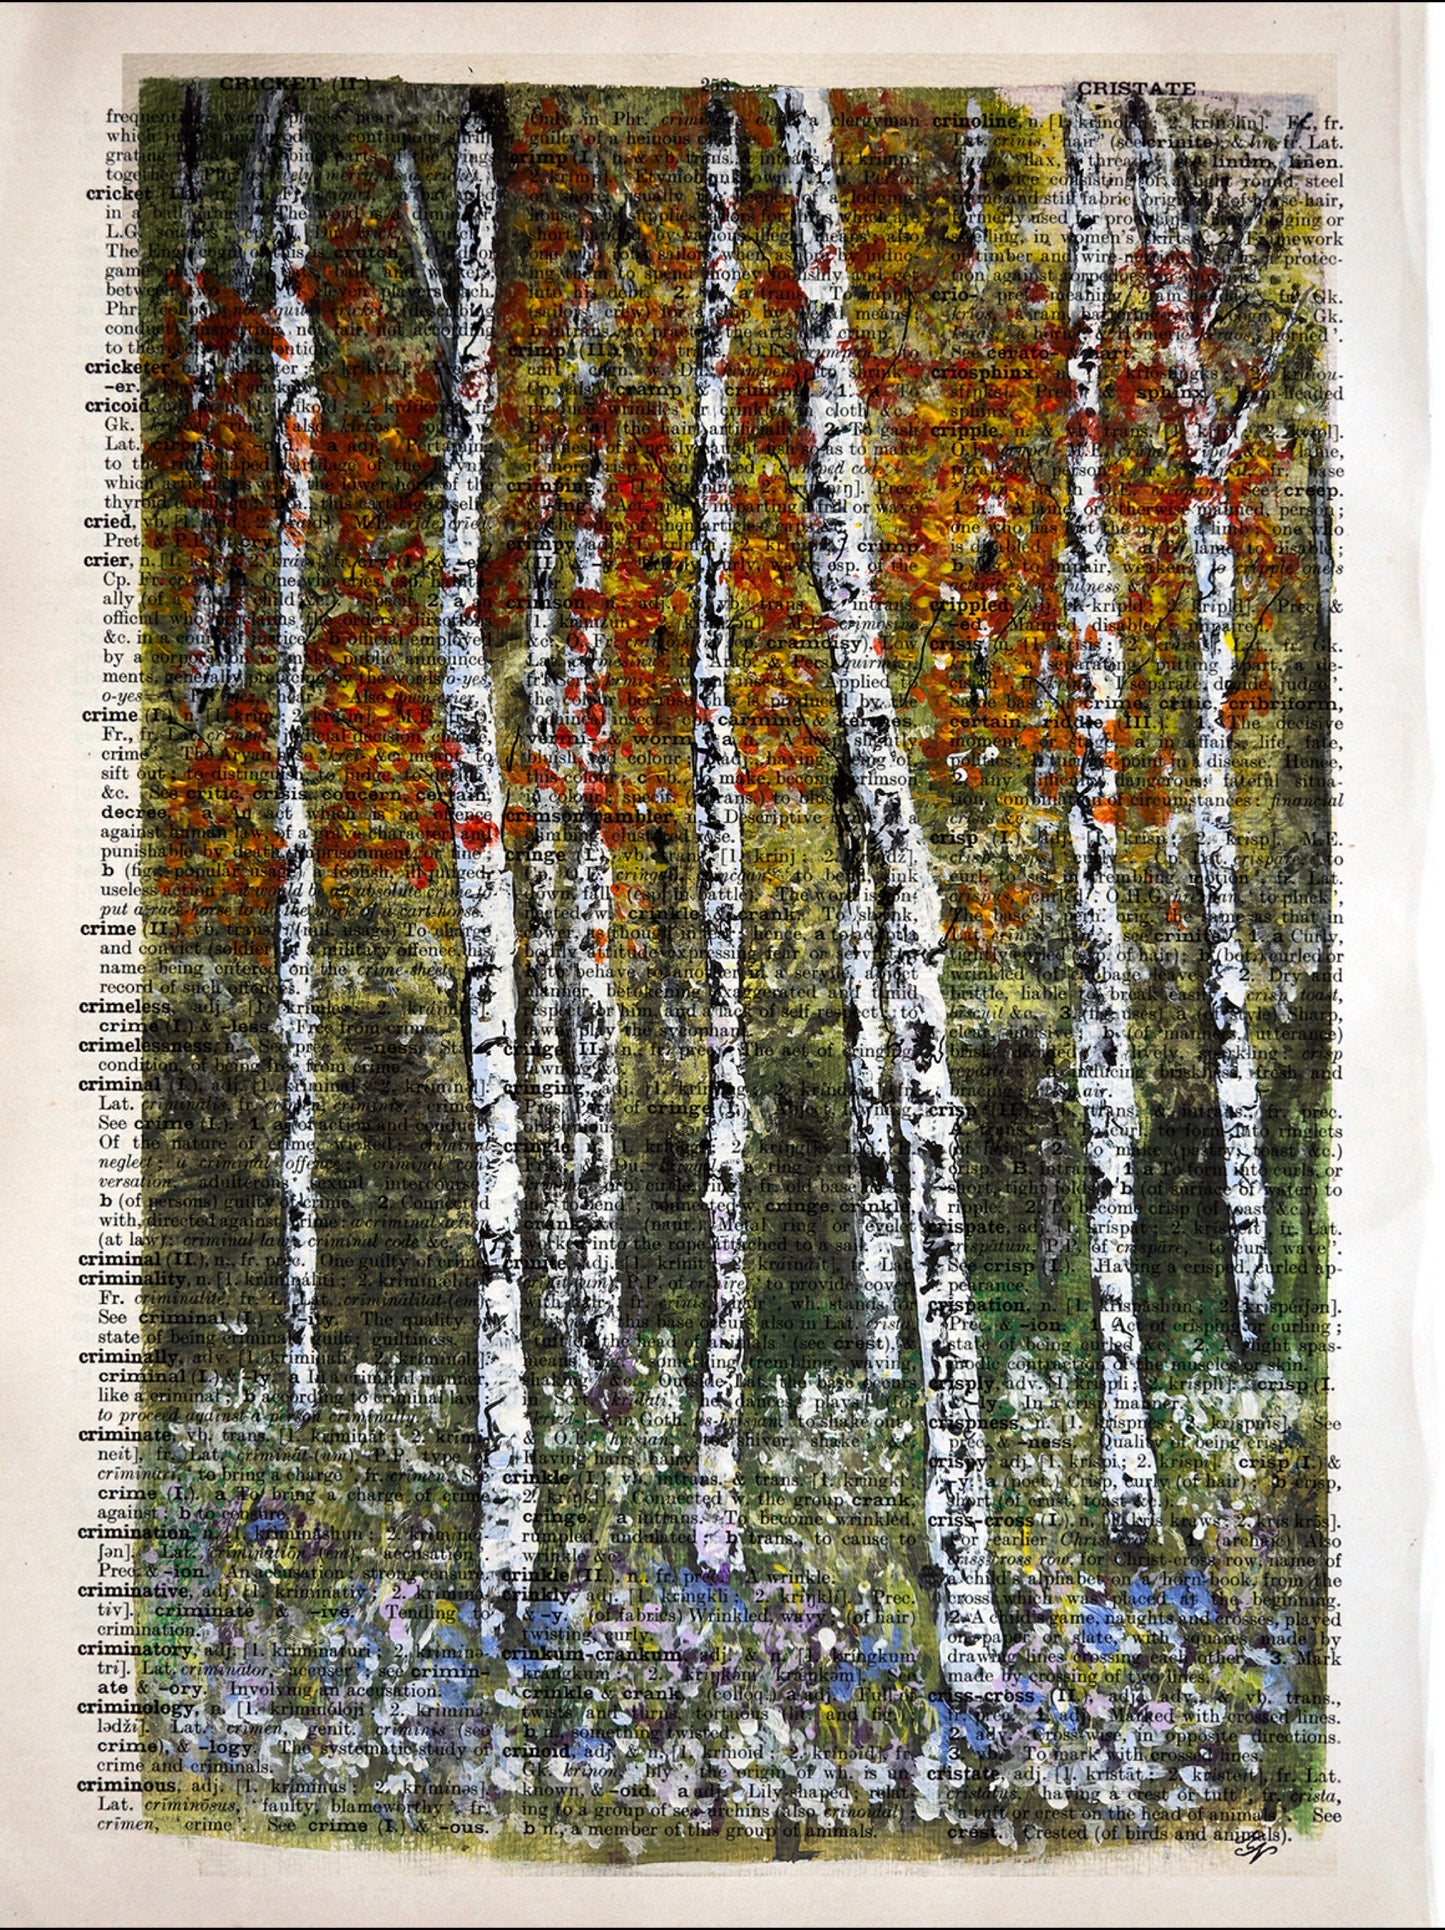 "Aspen Dreams" by Malgorzata Nierobis: Trees in the woods on an upcycled vintage dictionary page.